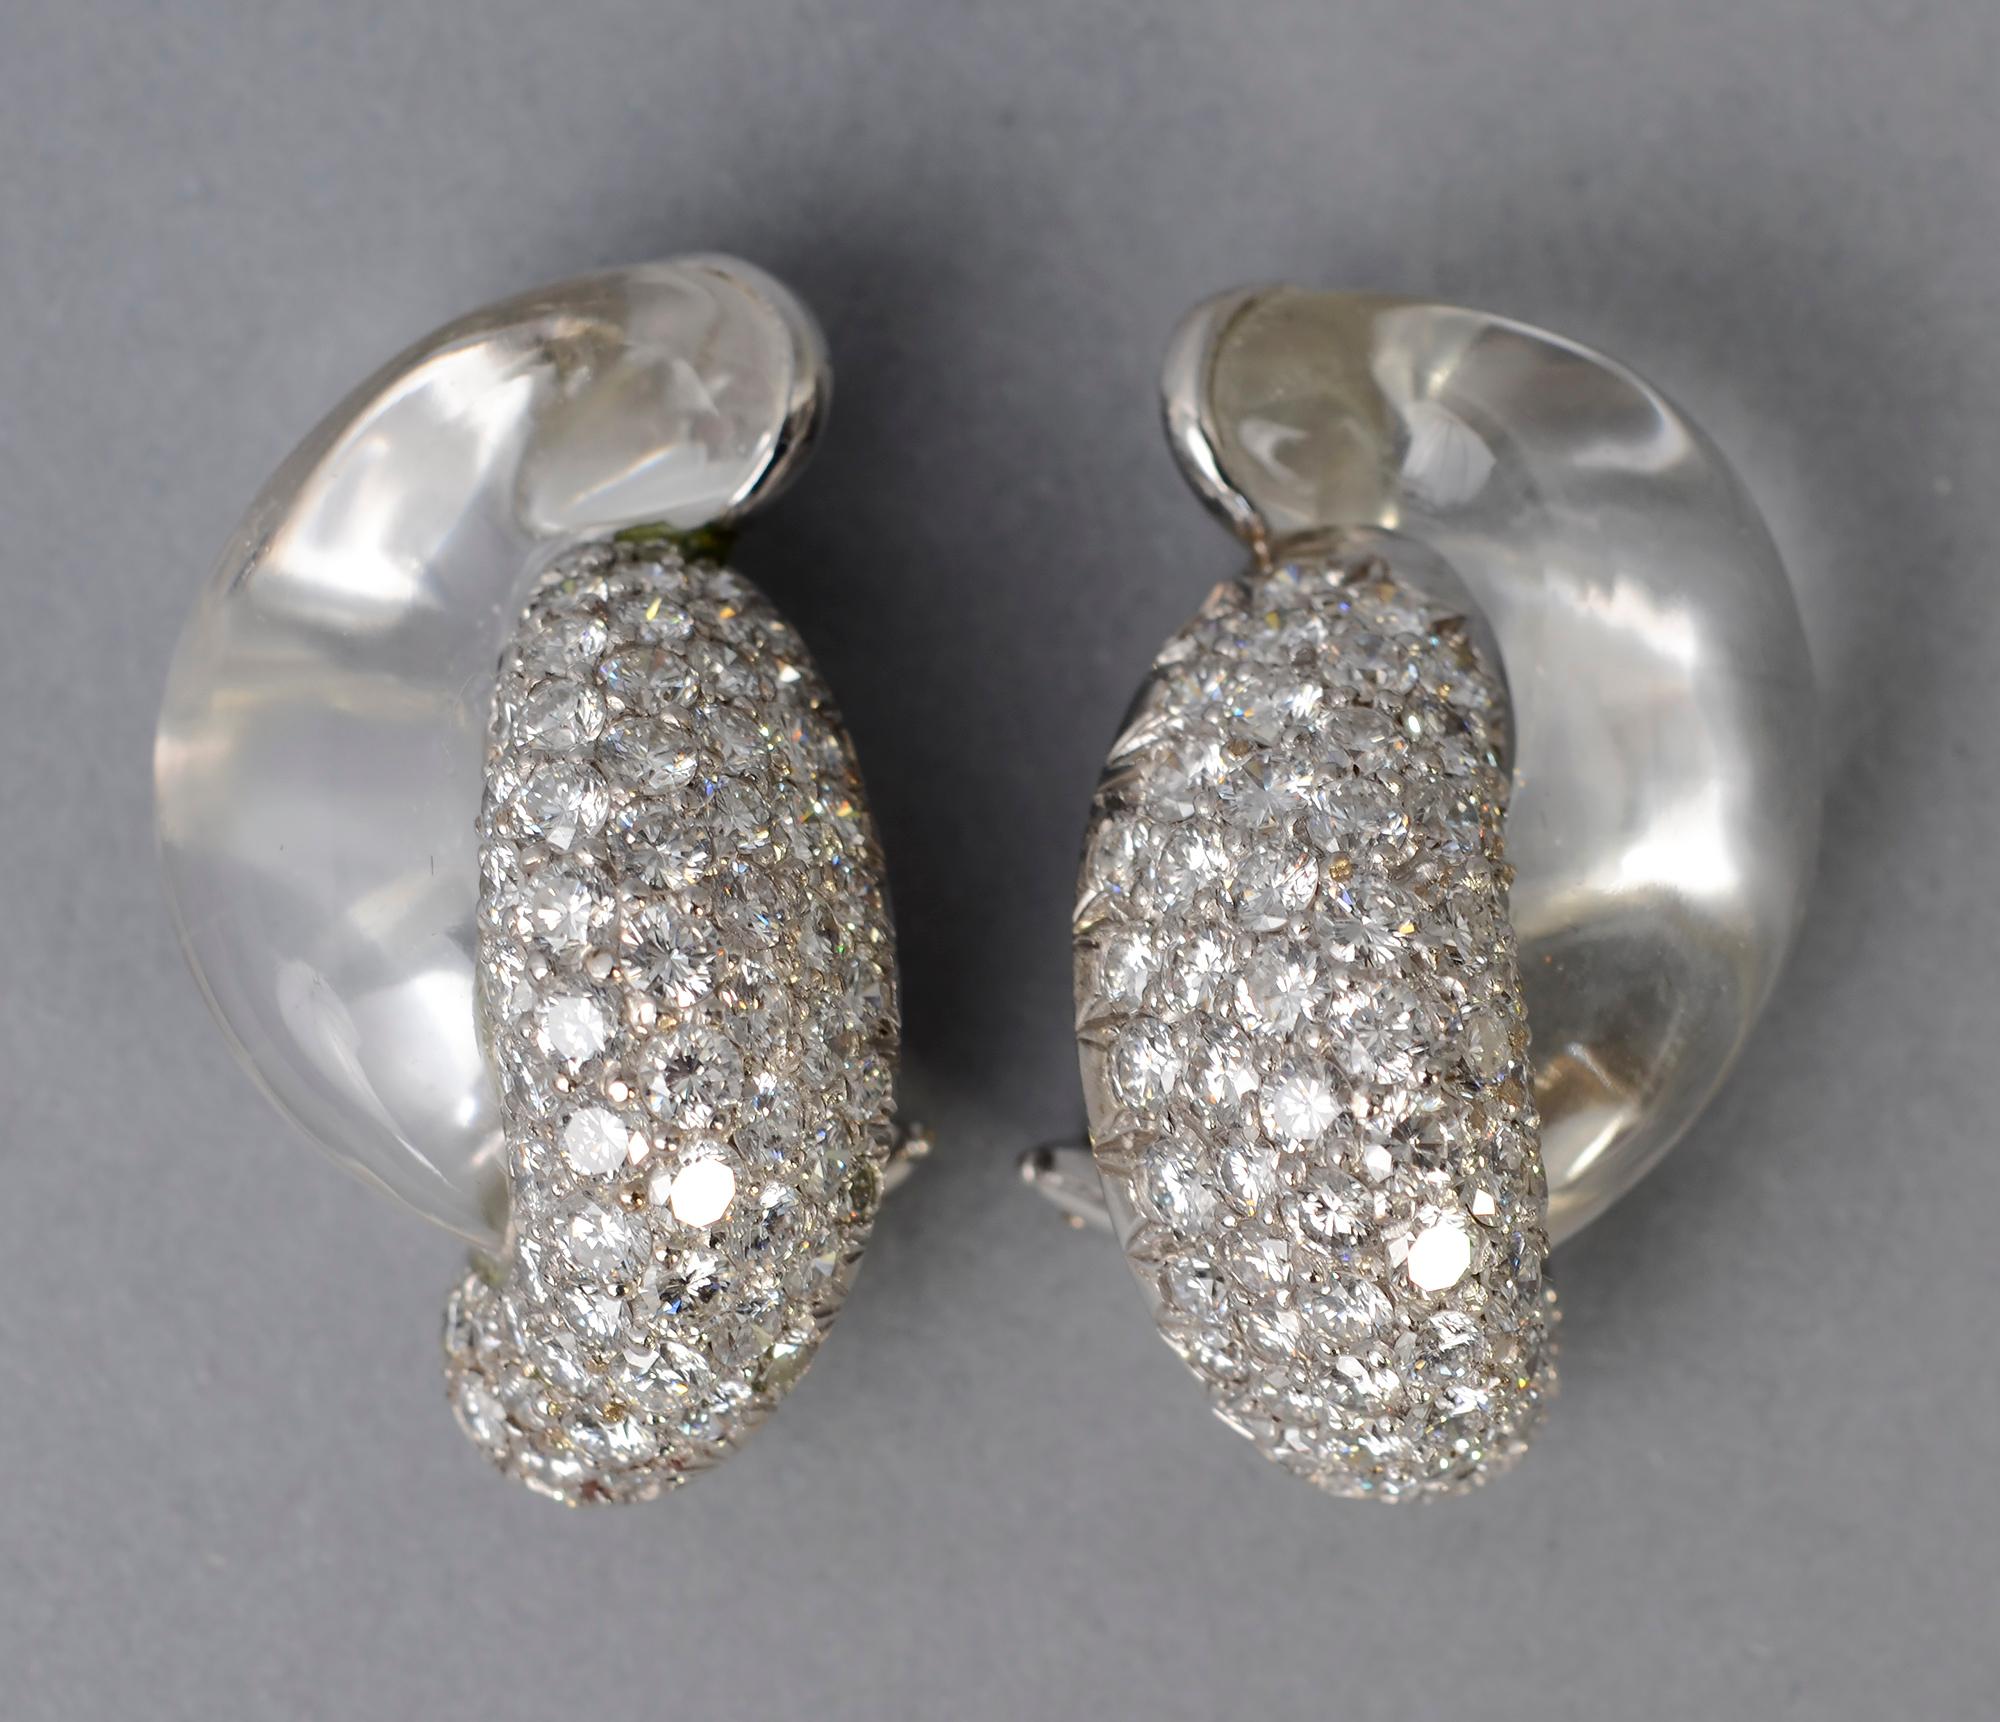 Exquisite Seaman Schepps classic half link earrings made of diamonds and rock crystal. They are set in 18 karat white gold. Clip backs can easily be converted to posts.
Signed and numbered. Schepps currently offers these earrings for $21,500.